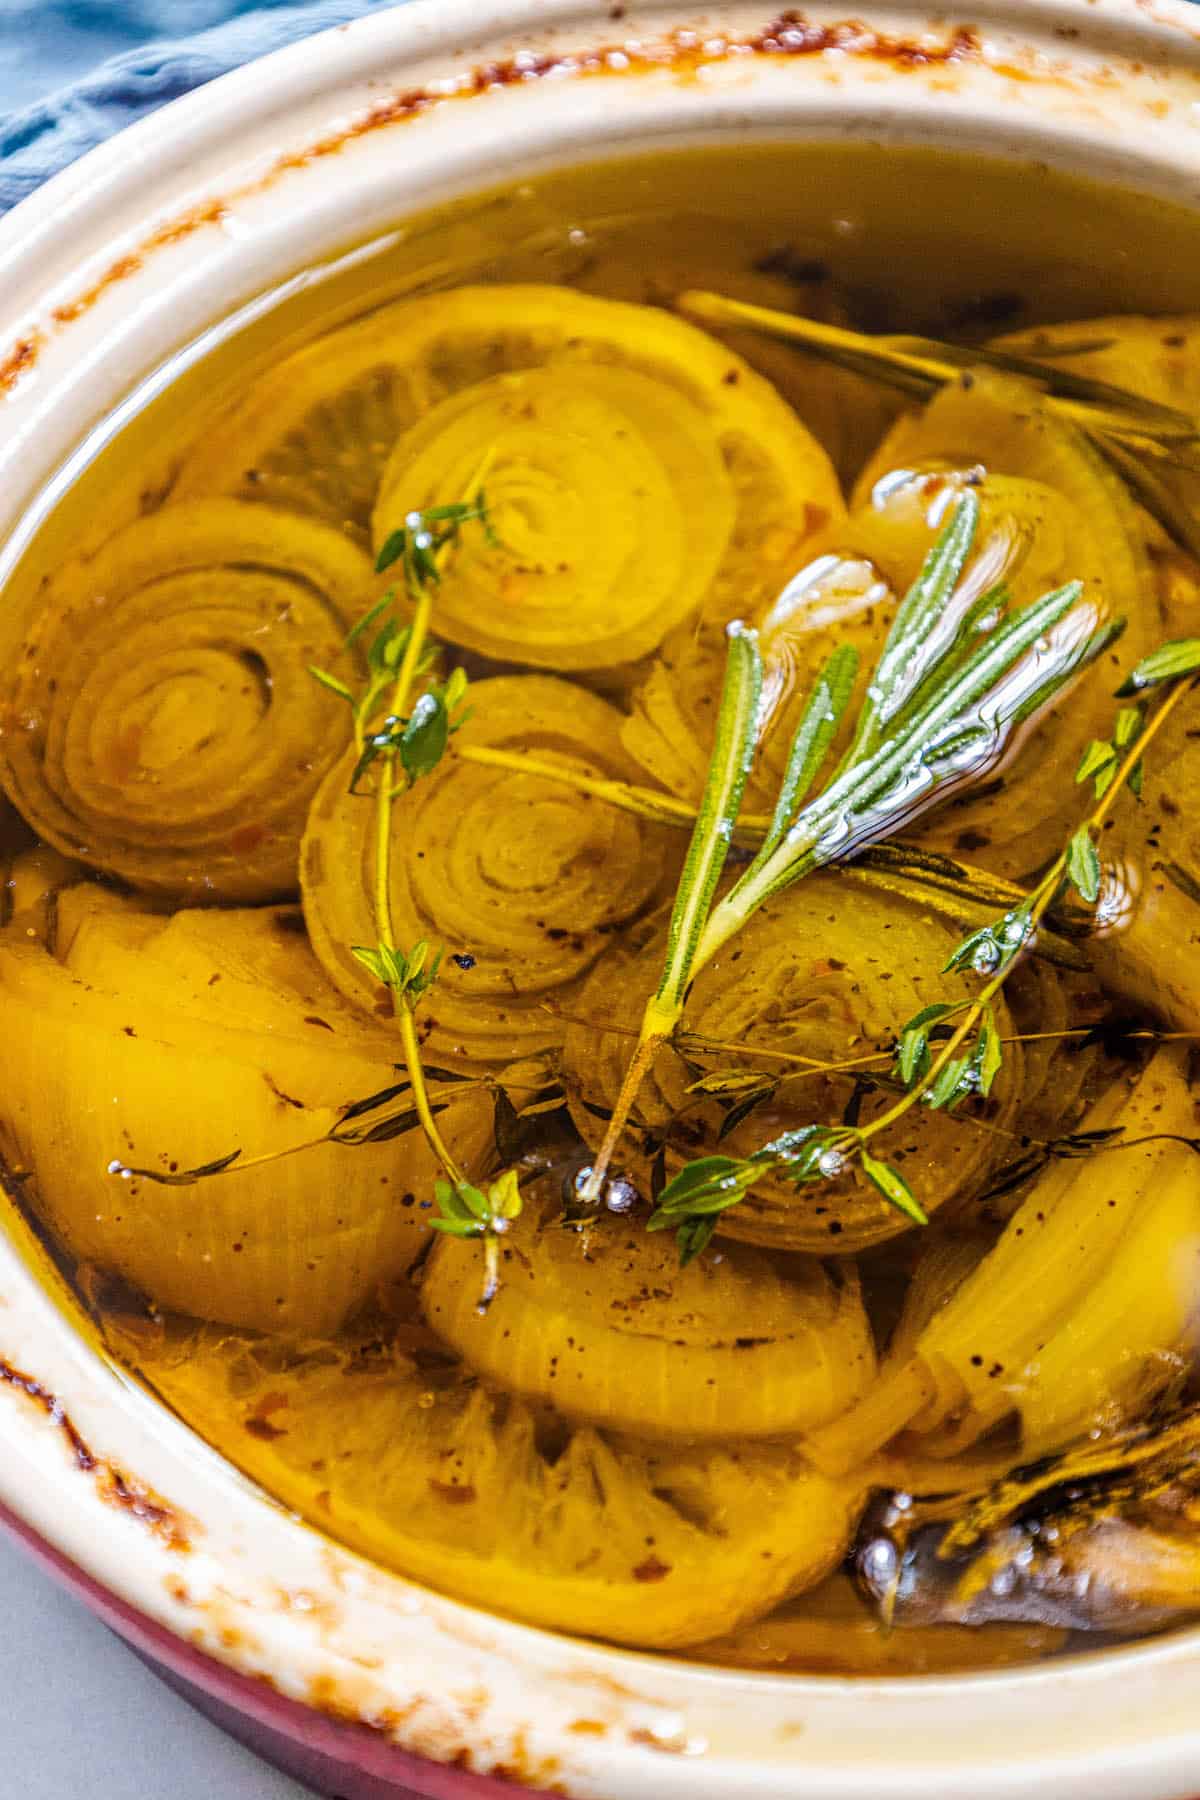 A bowl filled with shallot-infused confit and sprigs of thyme.